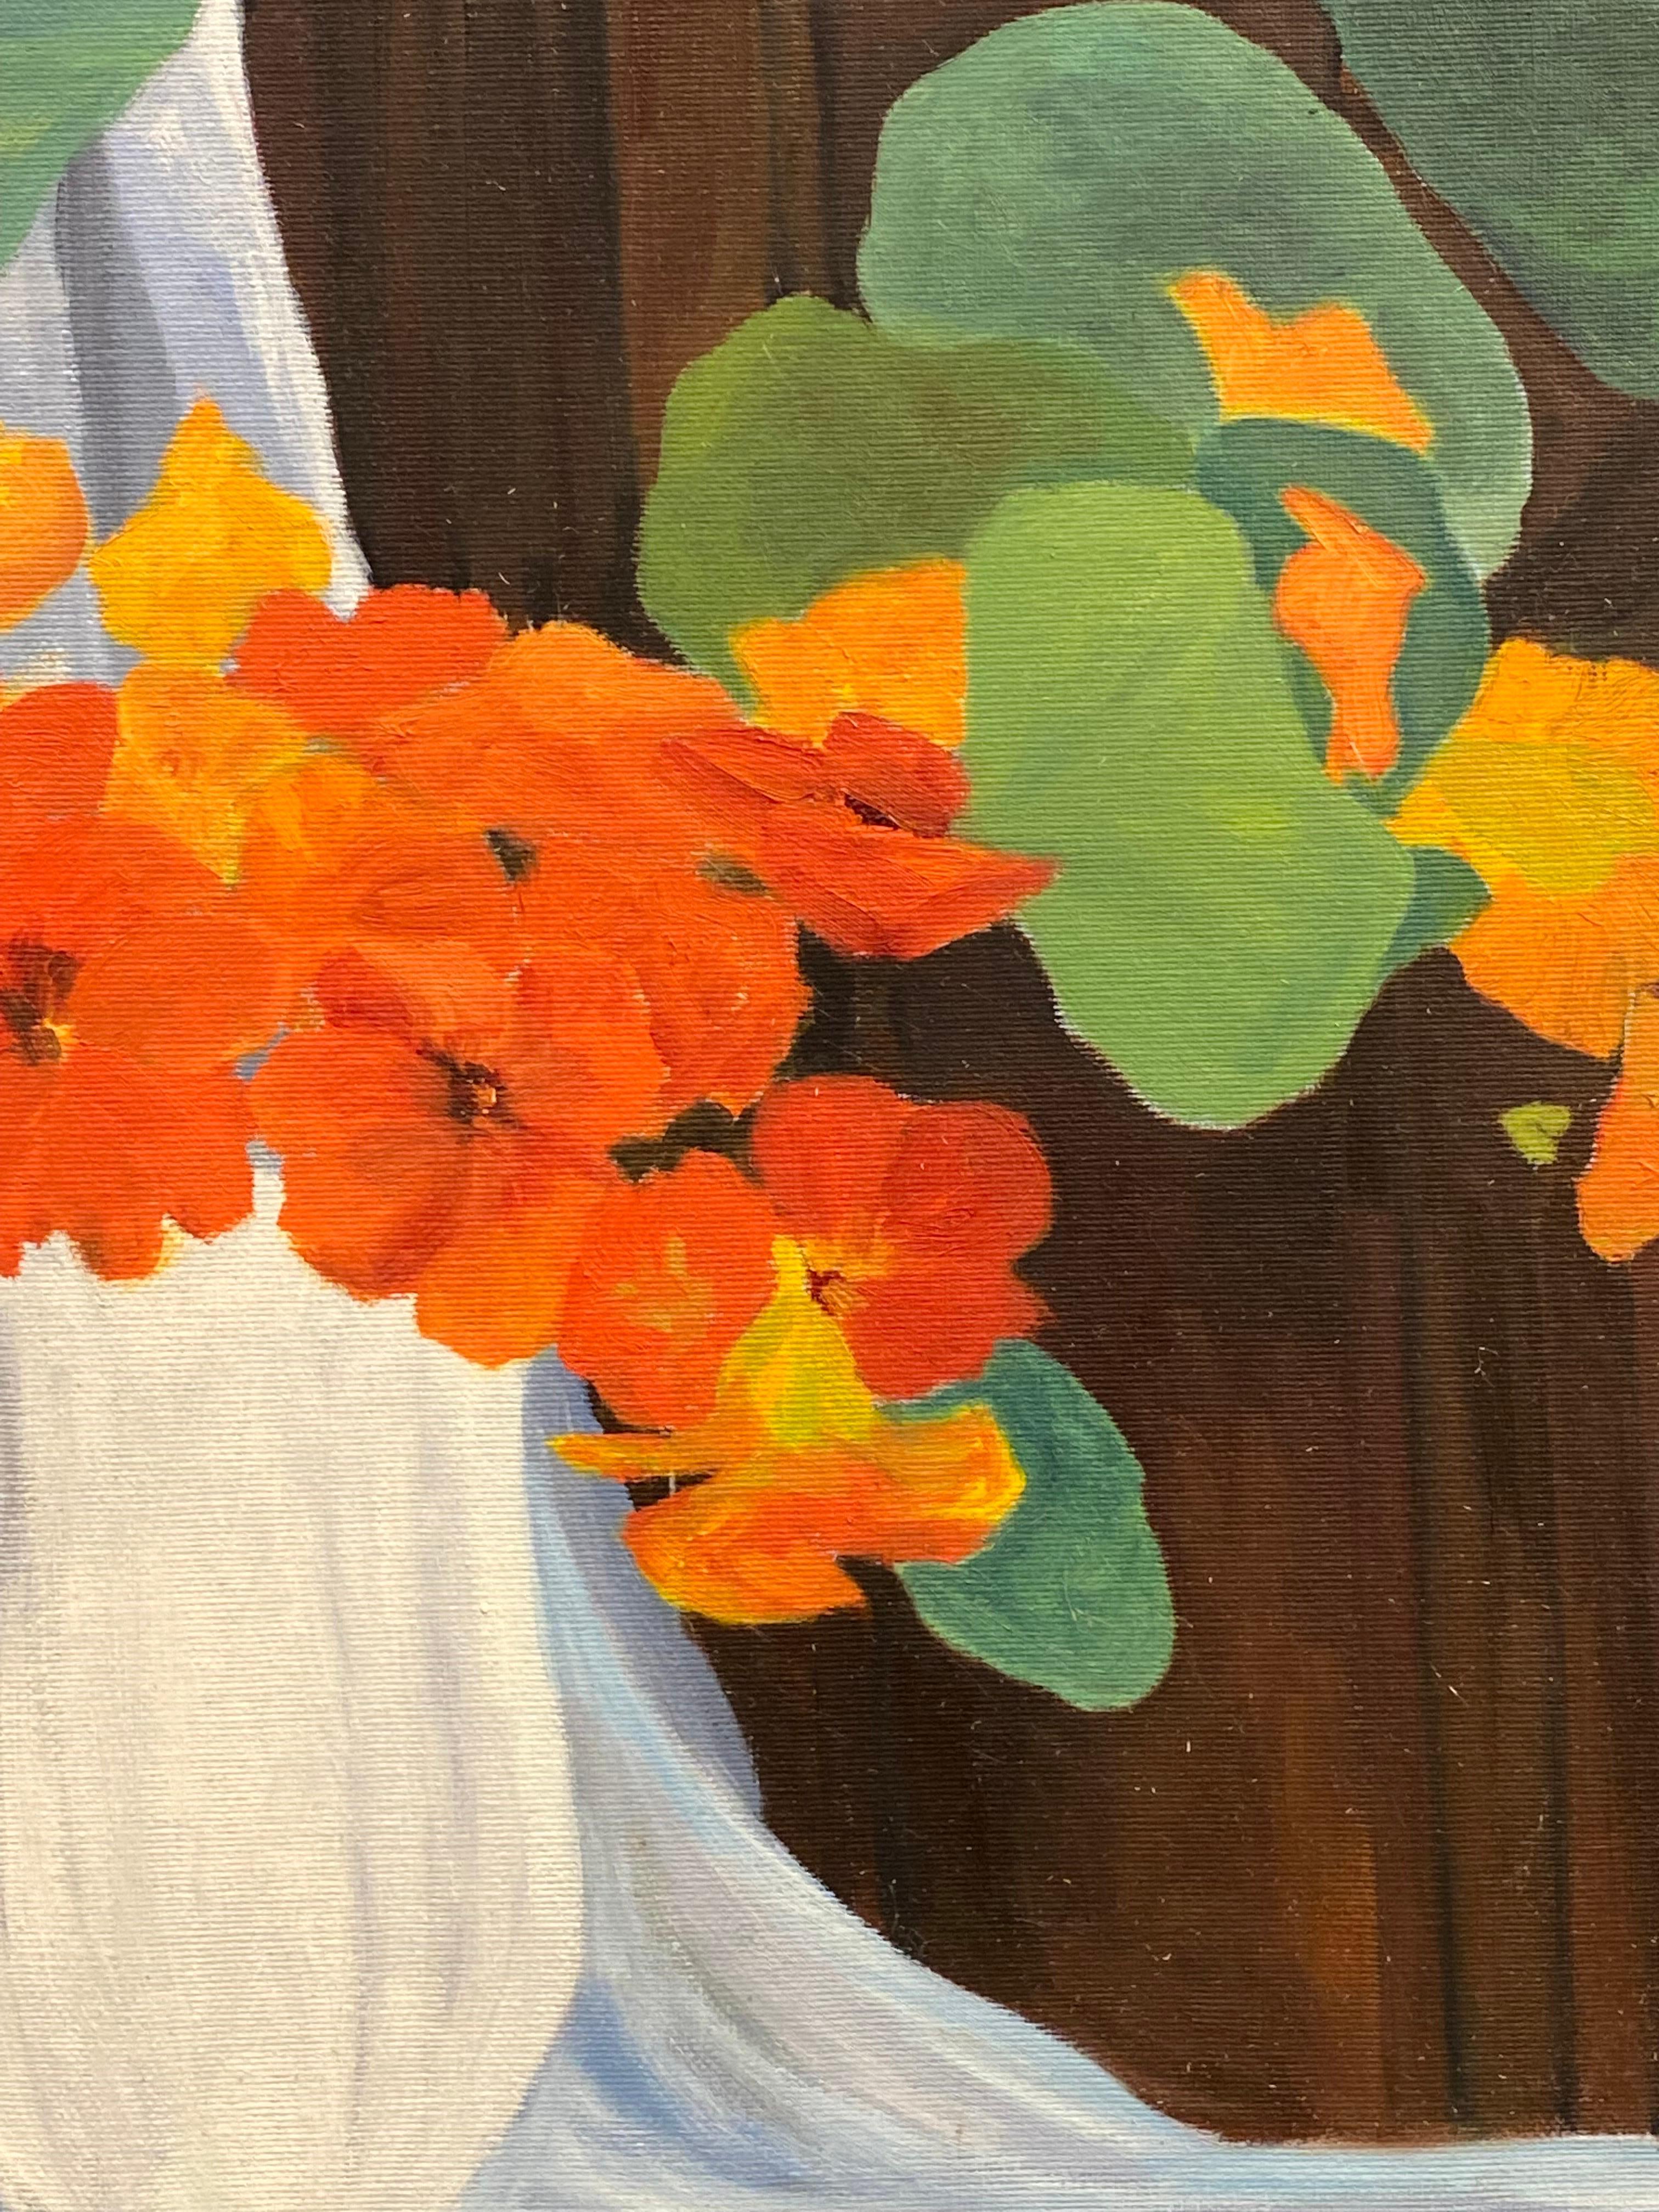 Artist/ School: French School, circa 1970's

Title: Orange Flowers and green plant within an interior setting

Medium: oil painting on canvas, unframed 

canvas: 24 x 20 inches

Provenance: private collection, France

Condition: The painting is in